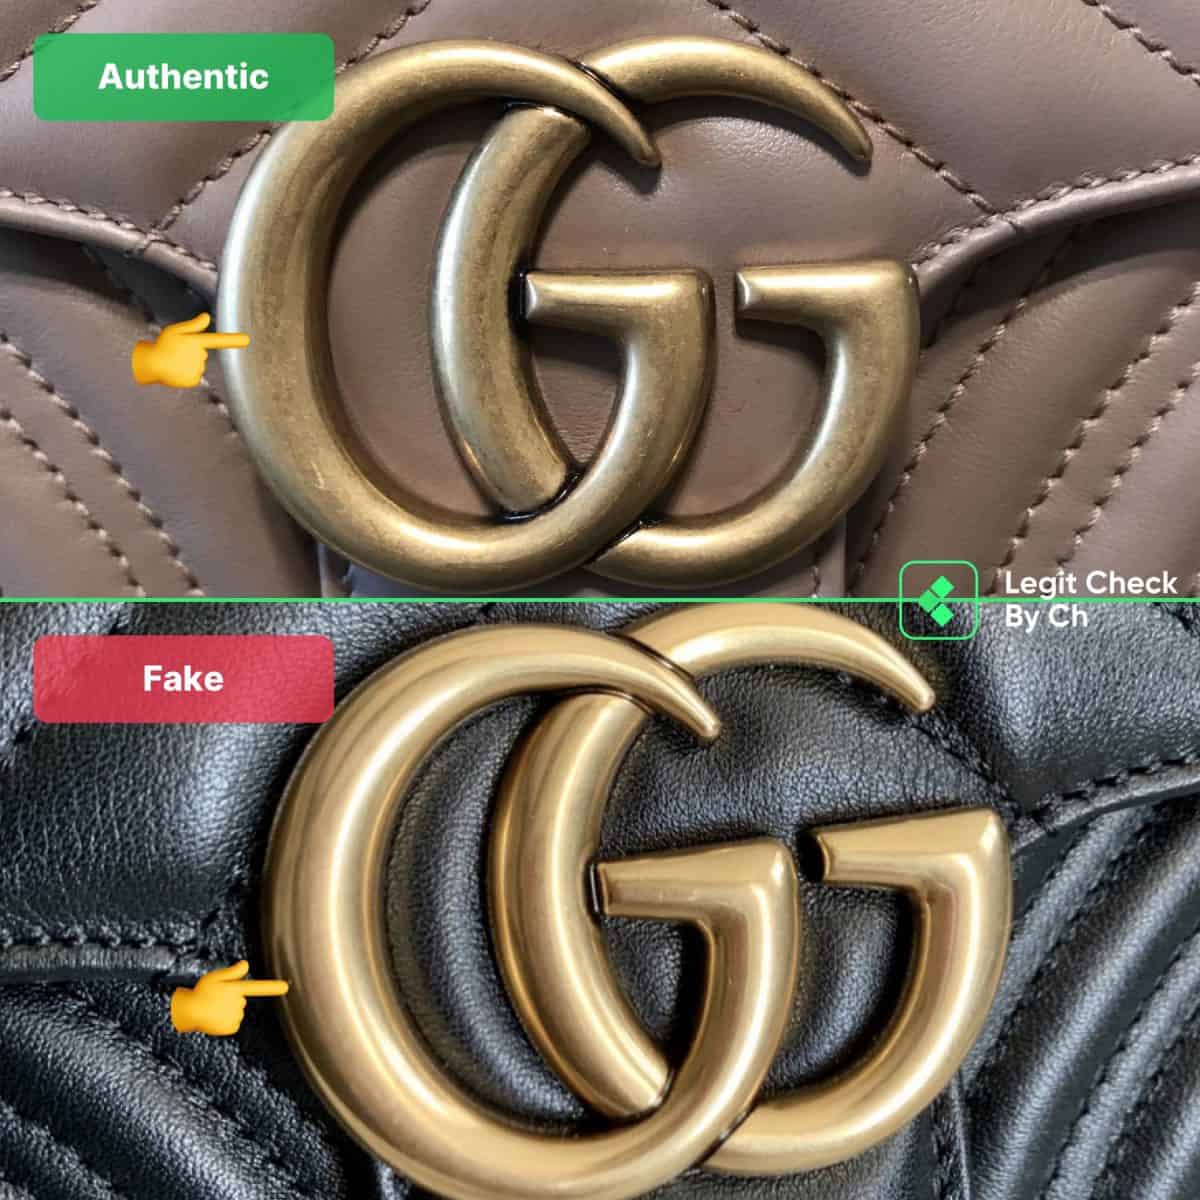 gucci gg bag authentication guide